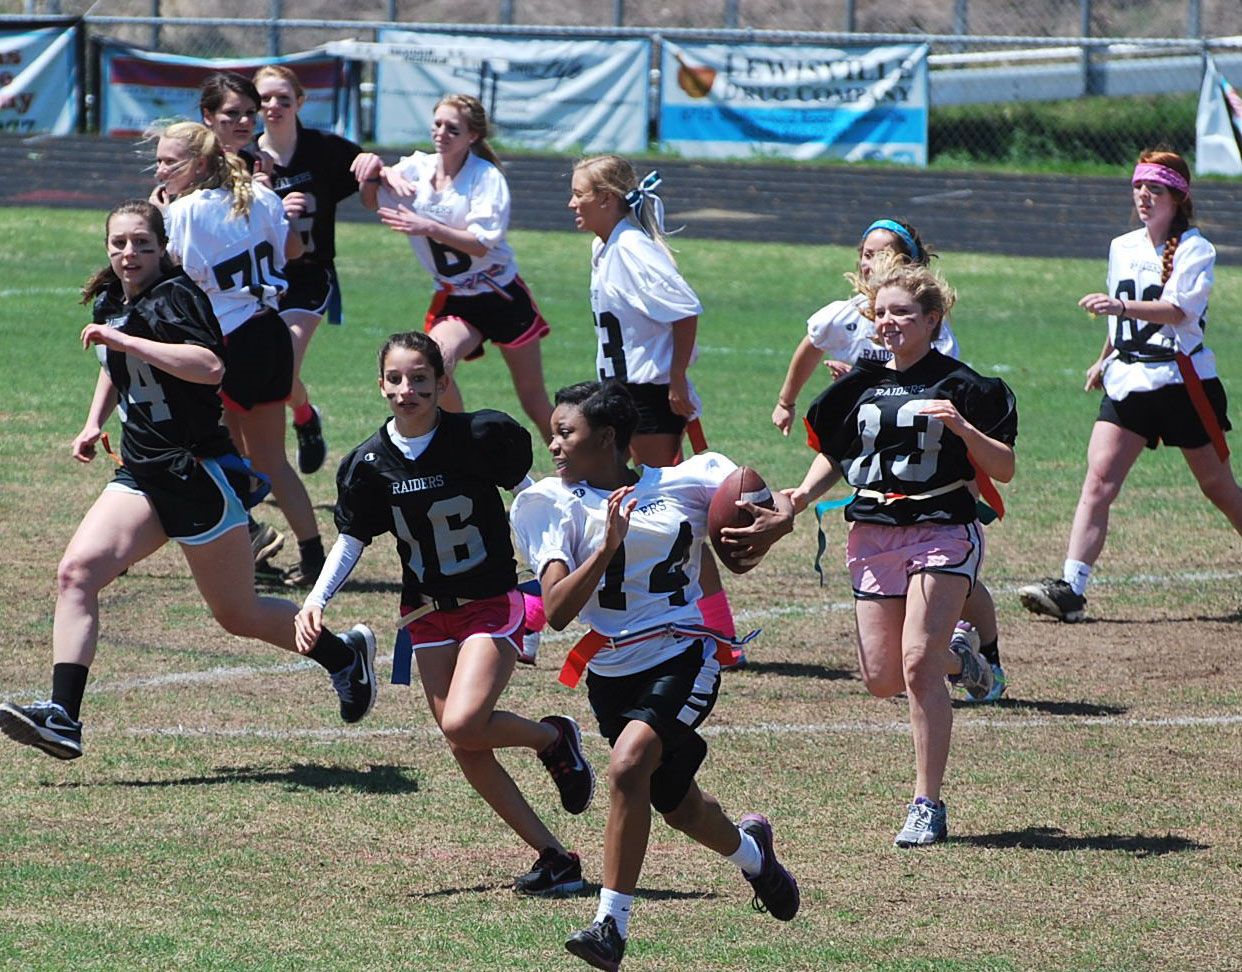 Powder+Puff+makes+a+return+to+Reagan+this+year.+Above%2C+girls+participated+in+the+2013+Powder+Puff.+